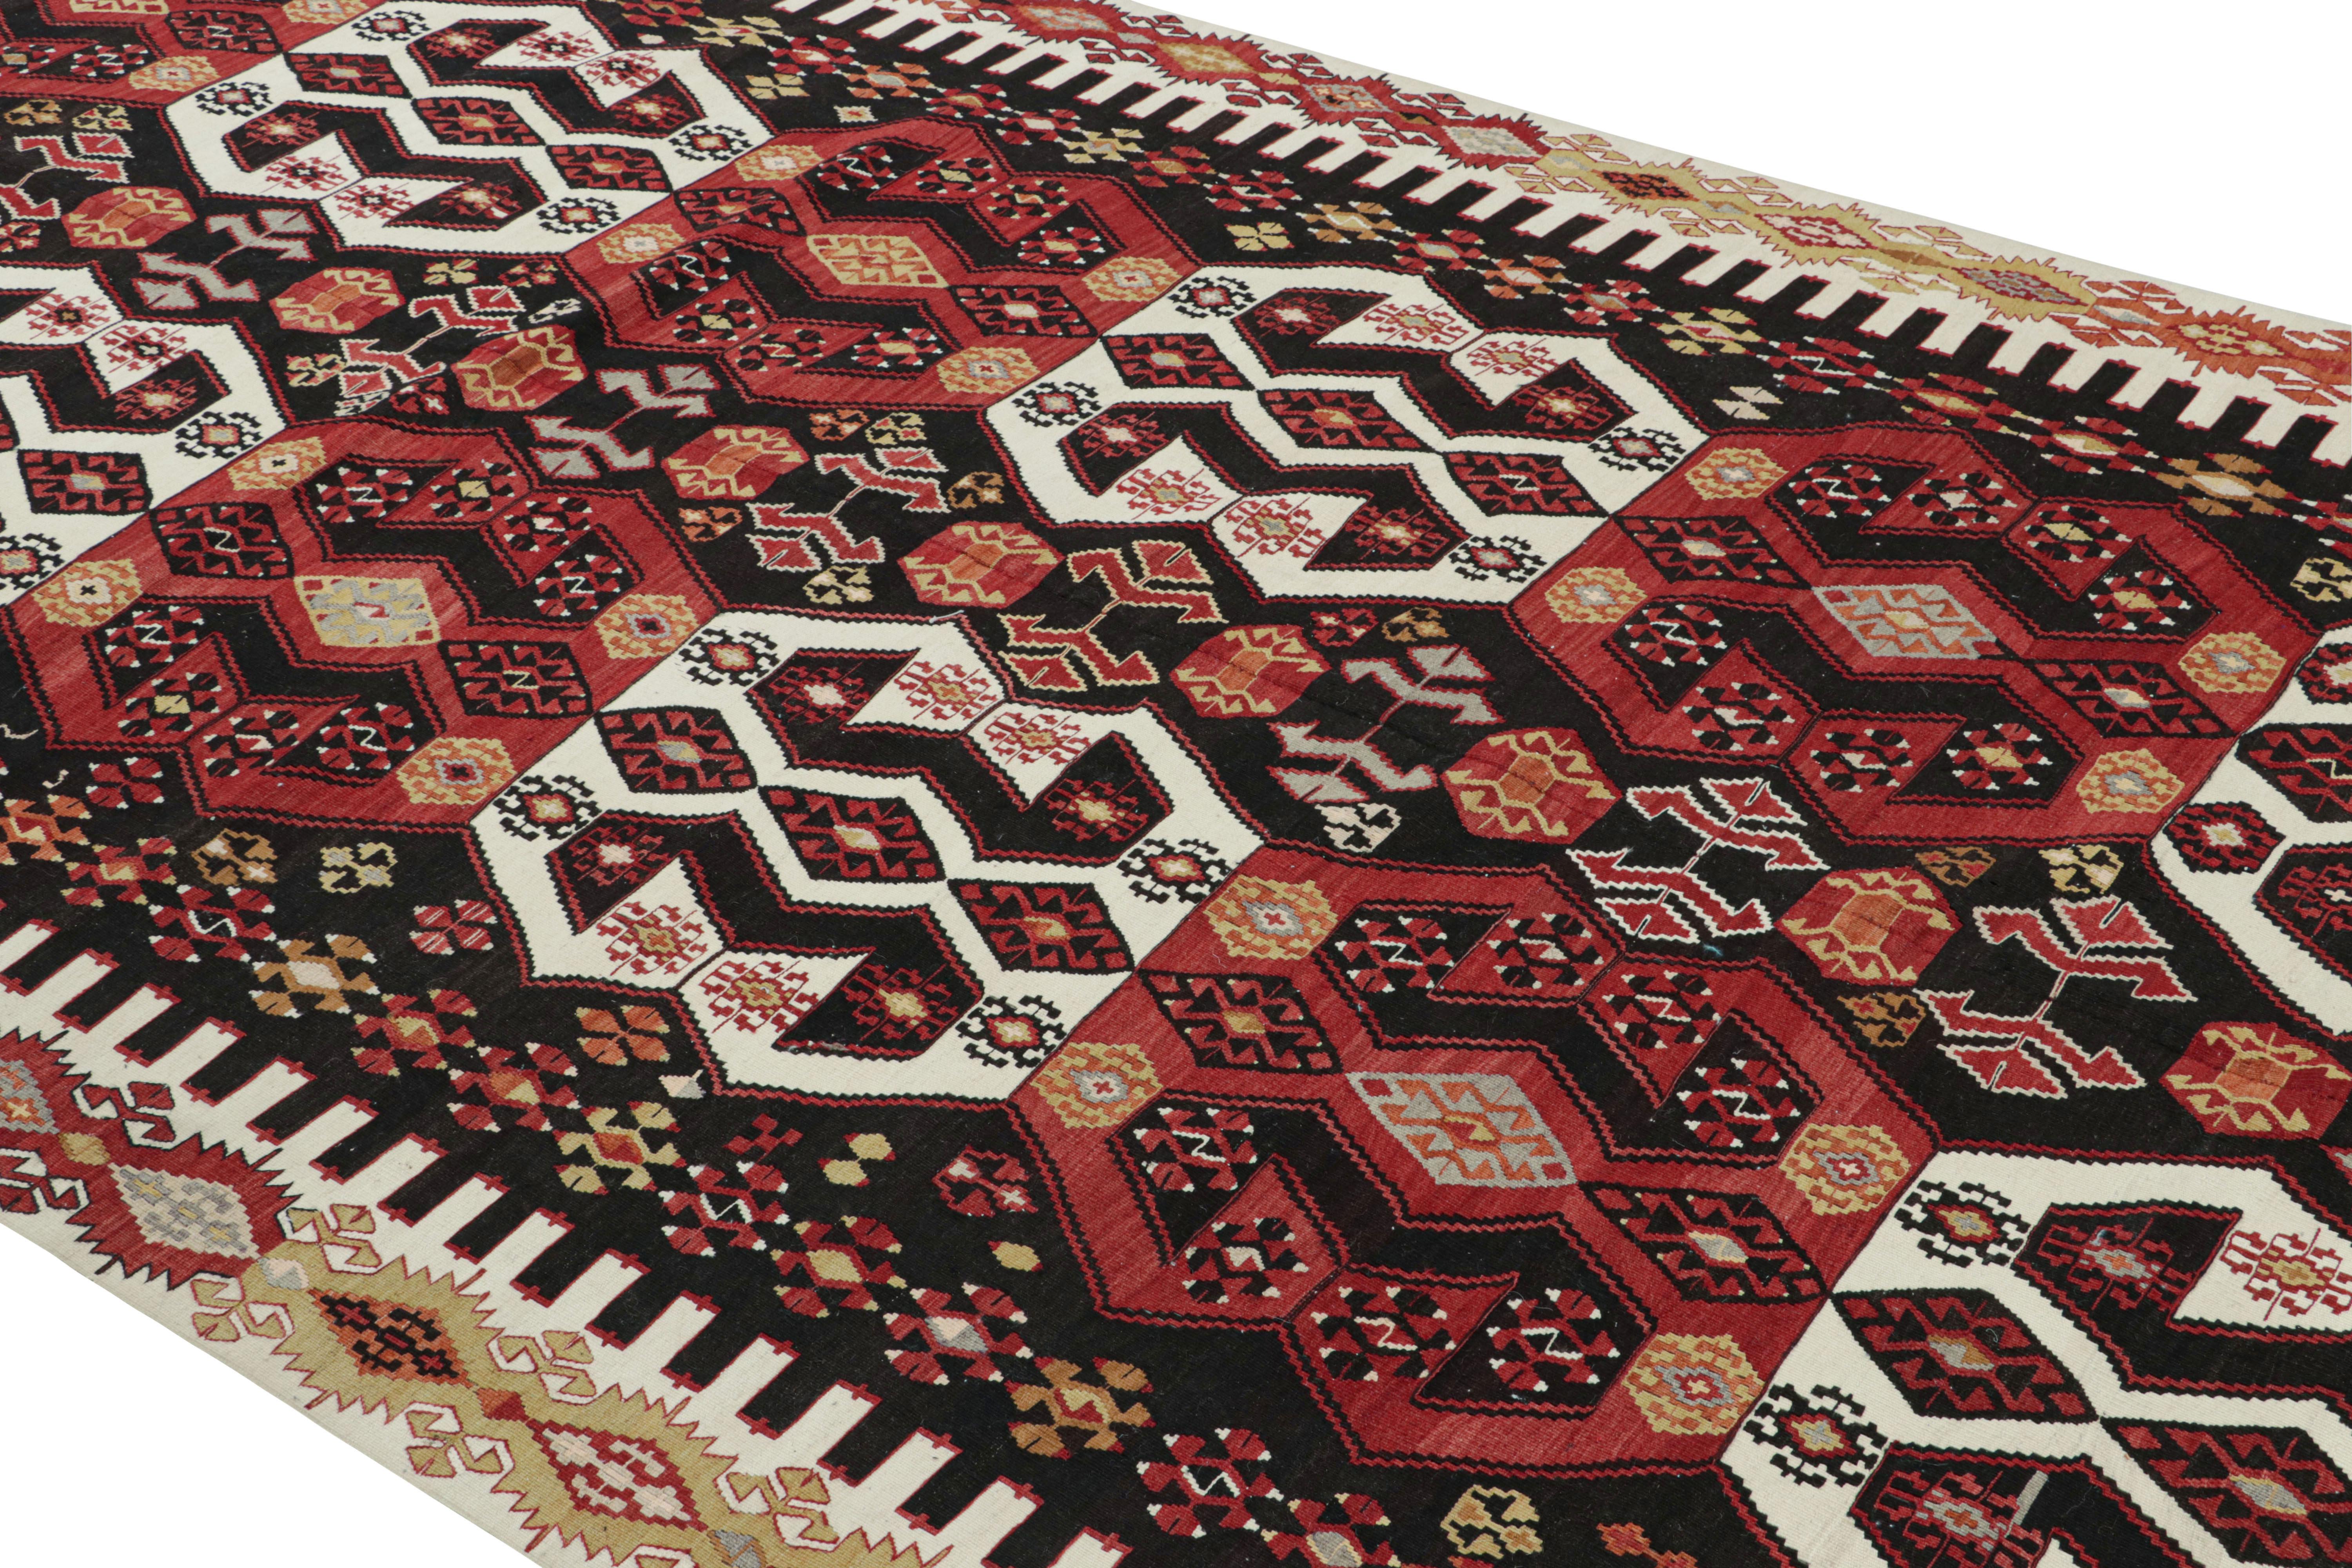 Flat-woven in Turkey originating between 1950-1960, this vintage midcentury geometric Kilim hails from the city of Malatya, enjoying a bold tribal contrast of its rich burgundy red and brown hues with the crisp off-white and soothing yellow tones